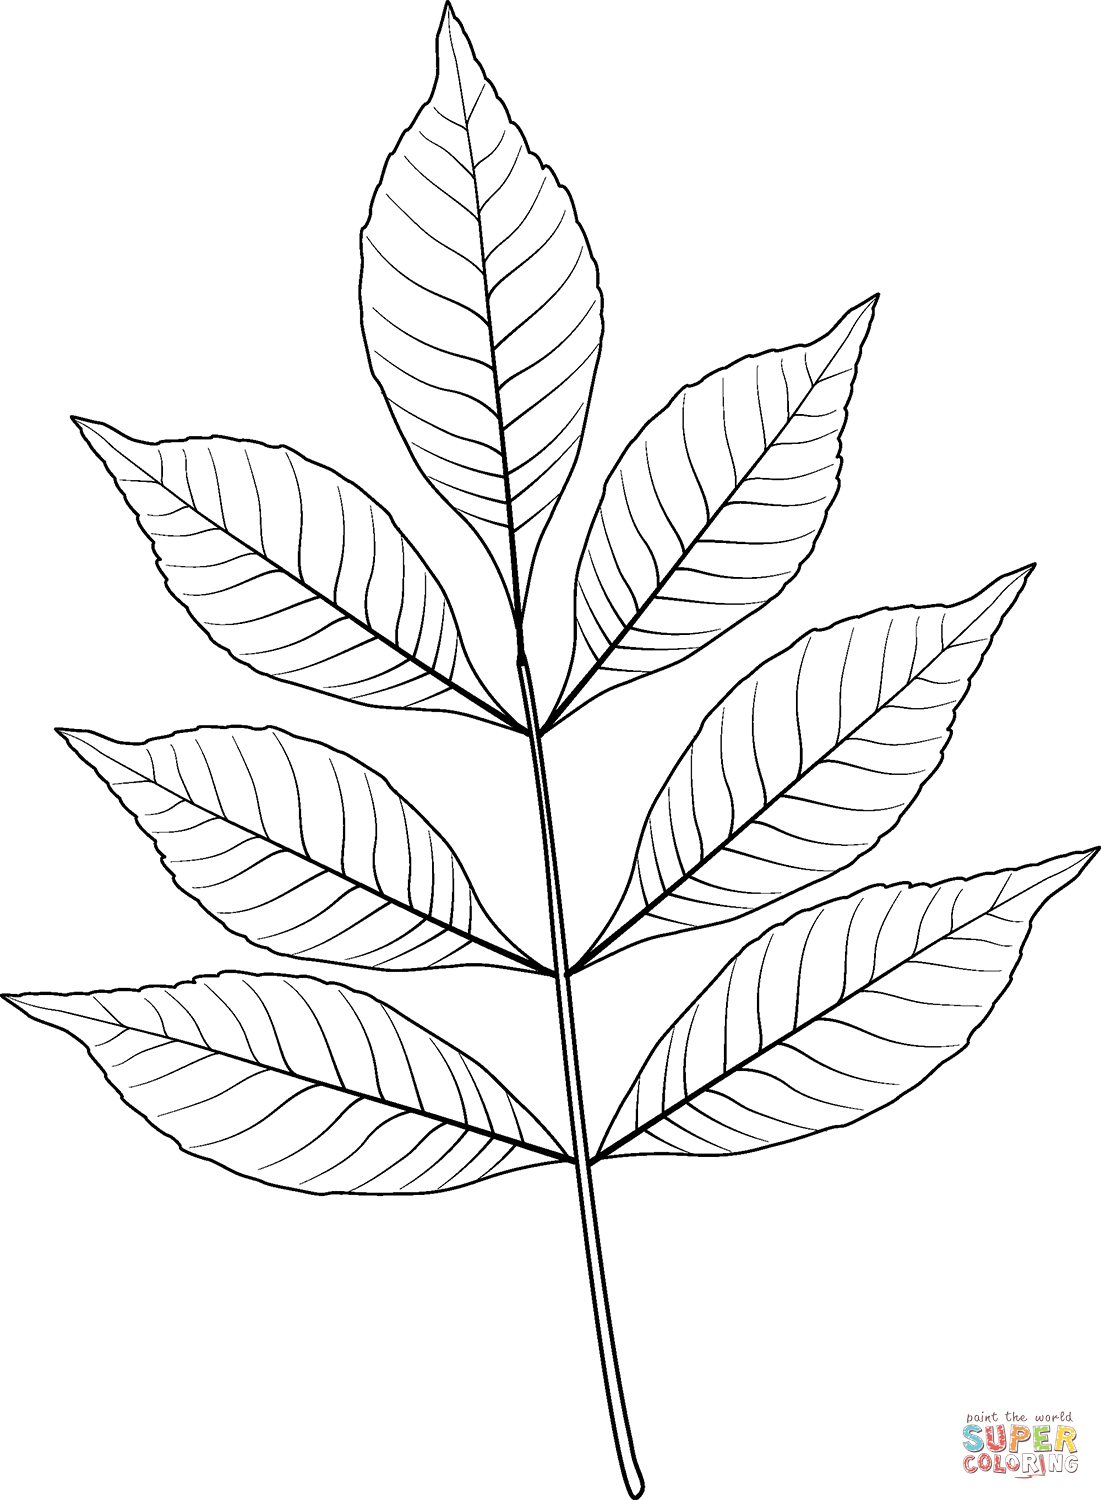 Modesto ash leaf coloring page